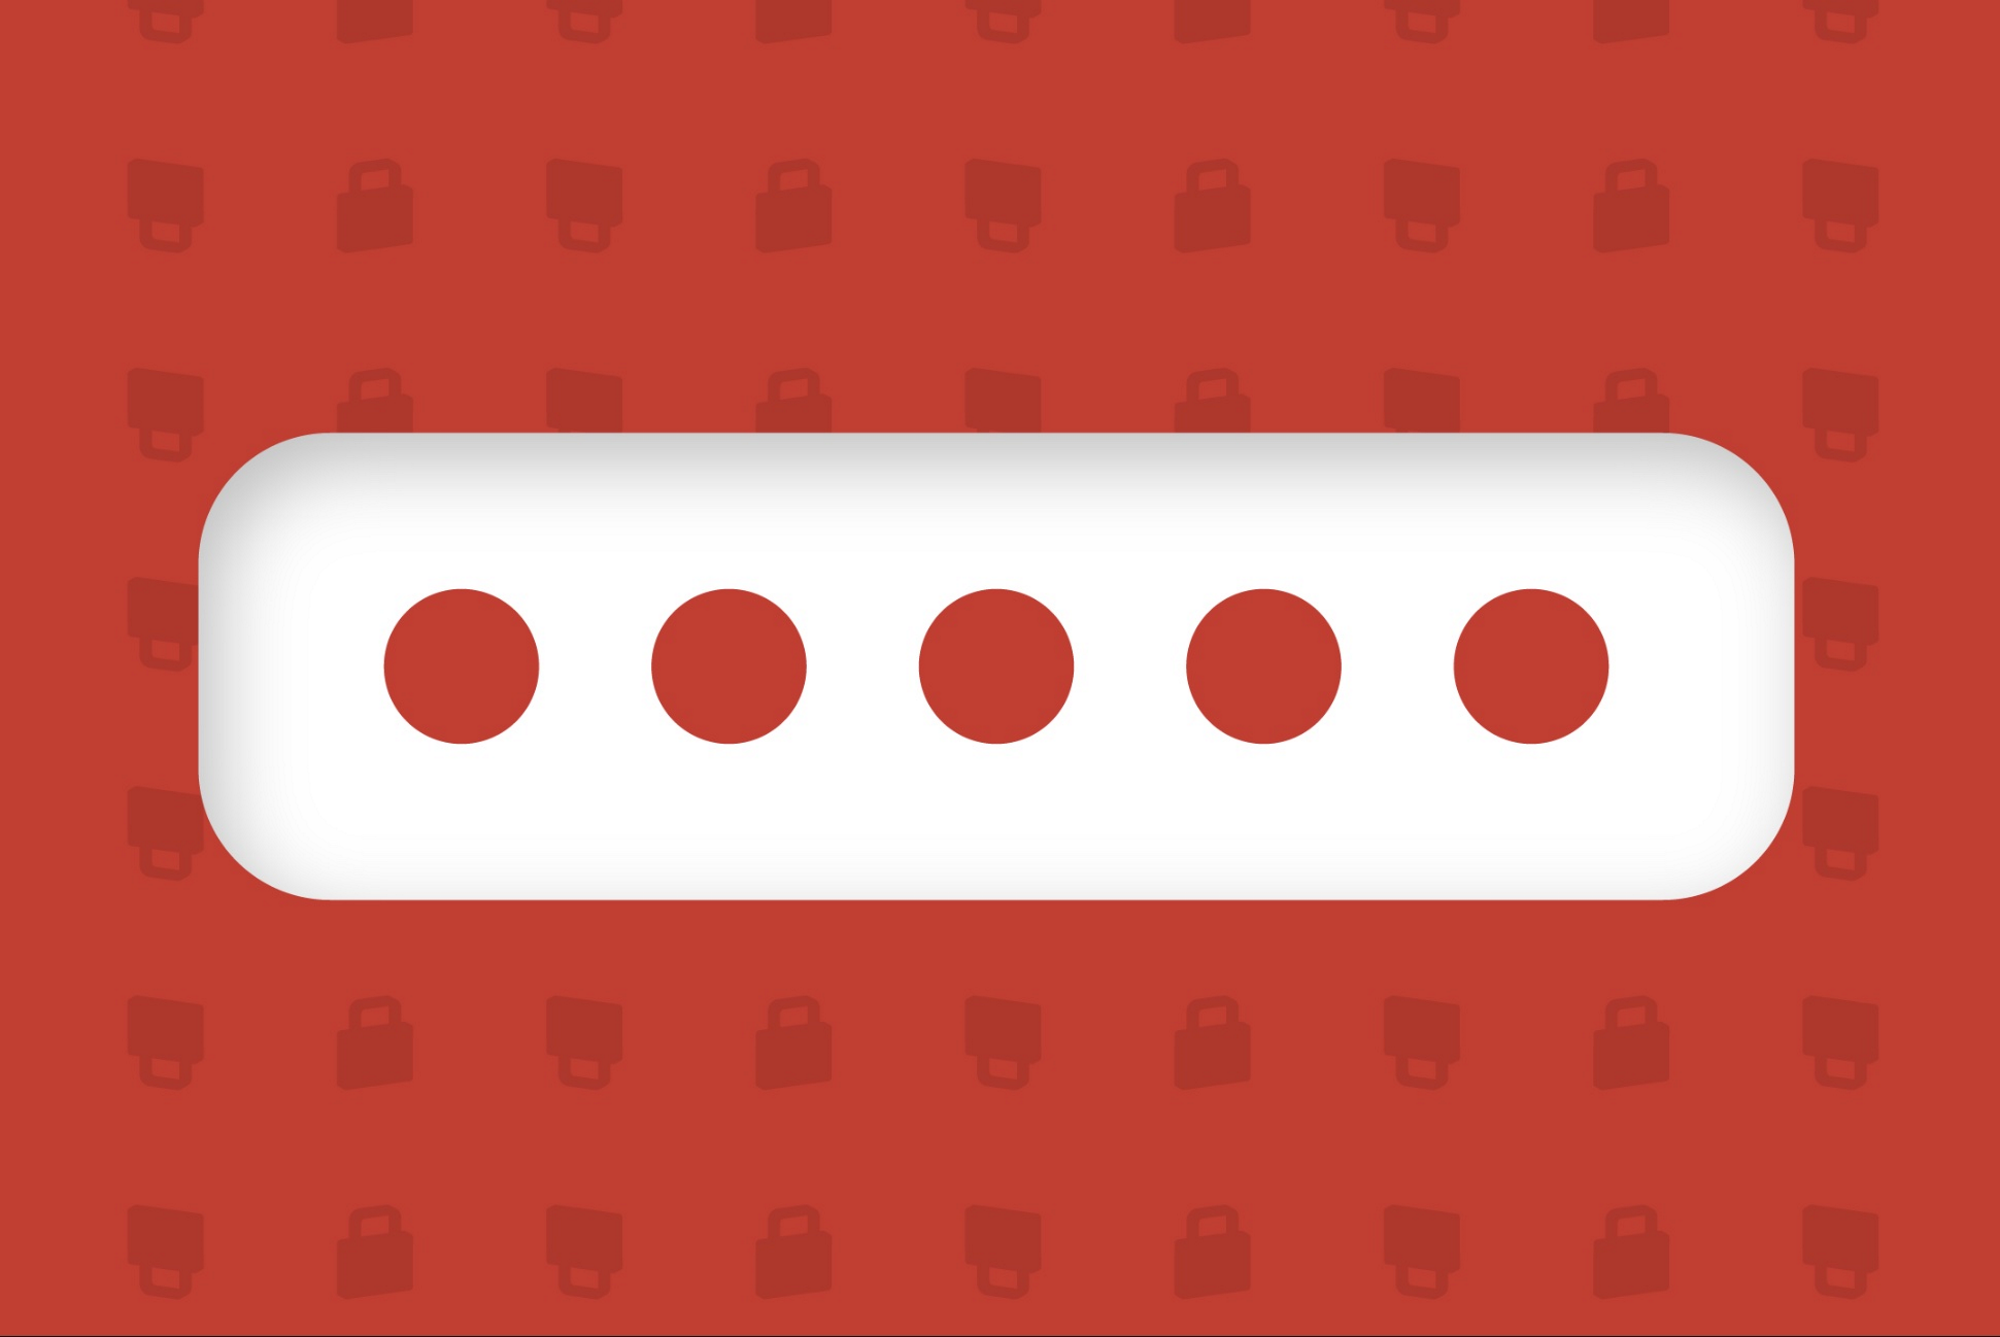 LastPass security breach keeps getting worse, admits parent company